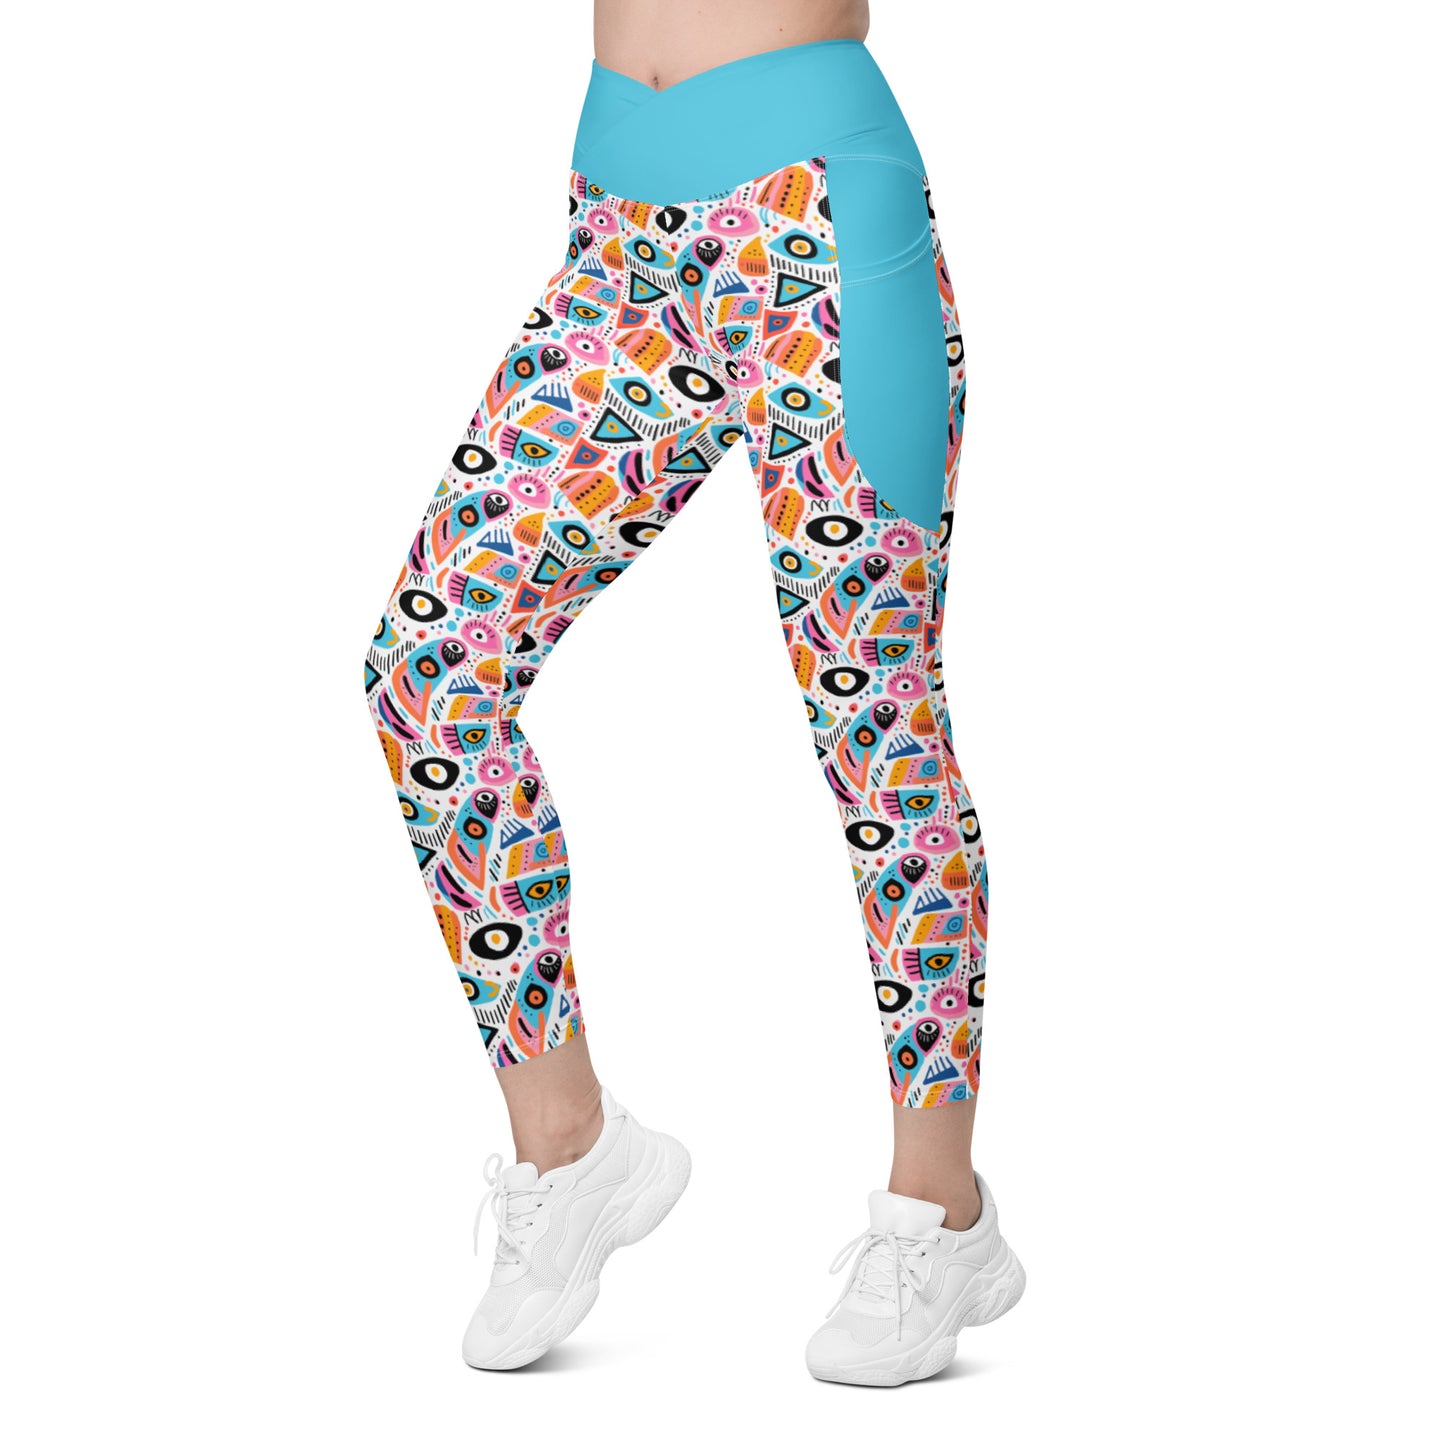 Malocchio Crossover Waist 7/8 Recycled Yoga Leggings / Yoga Pants with Pockets